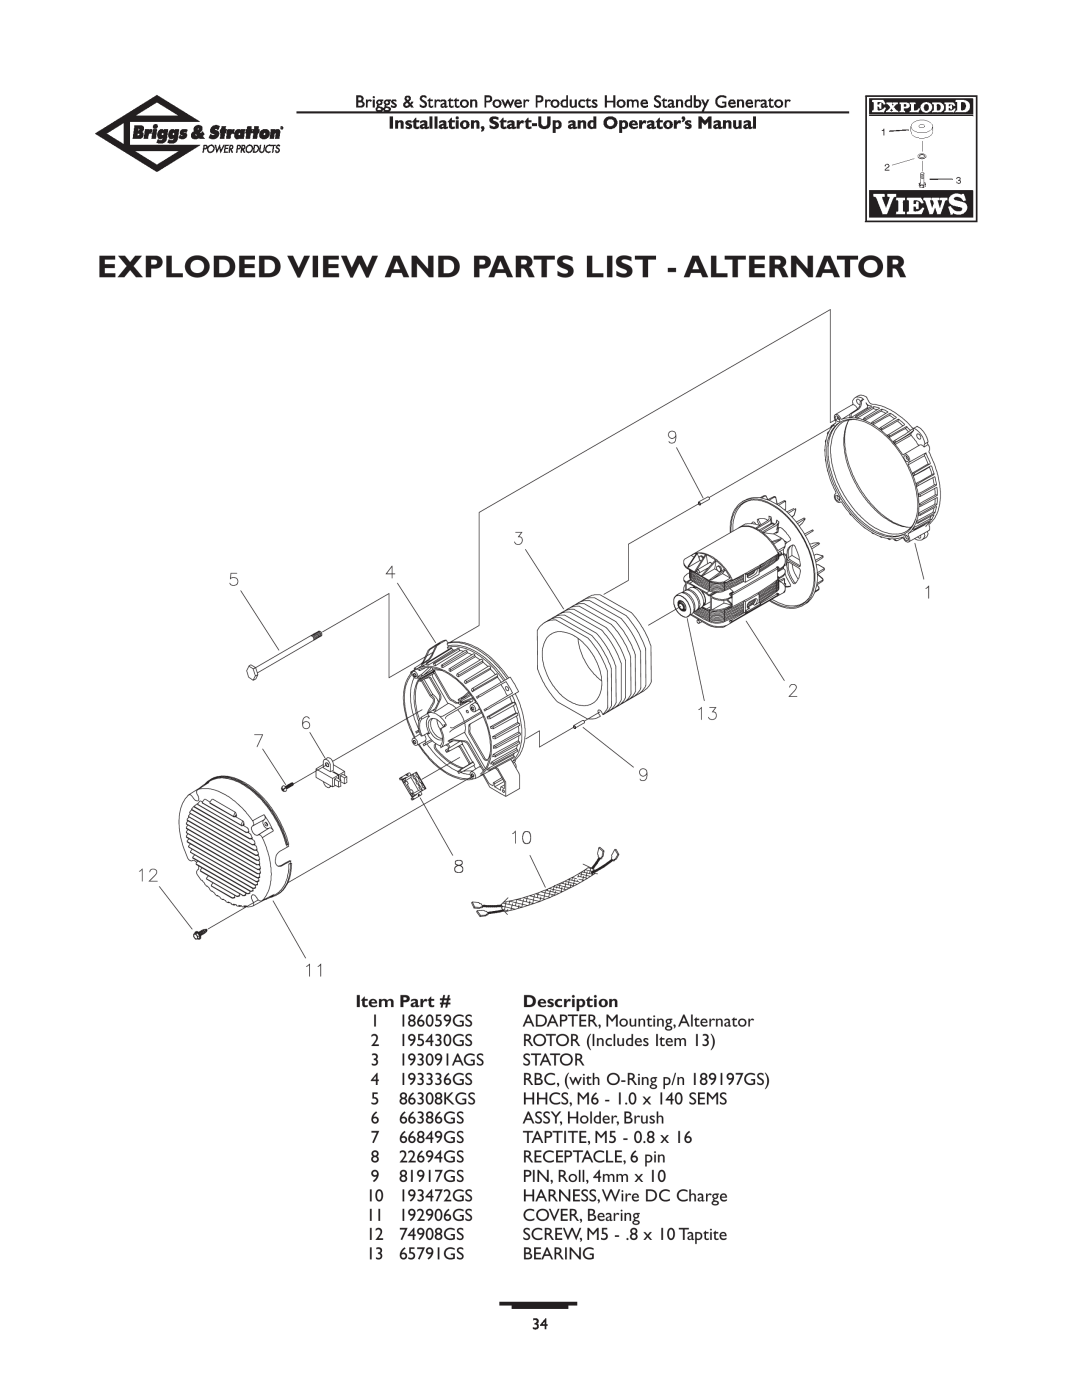 Briggs & Stratton 01897-0 manual Exploded View And Parts List - Alternator, Installation, Start-Up and Operator’s Manual 